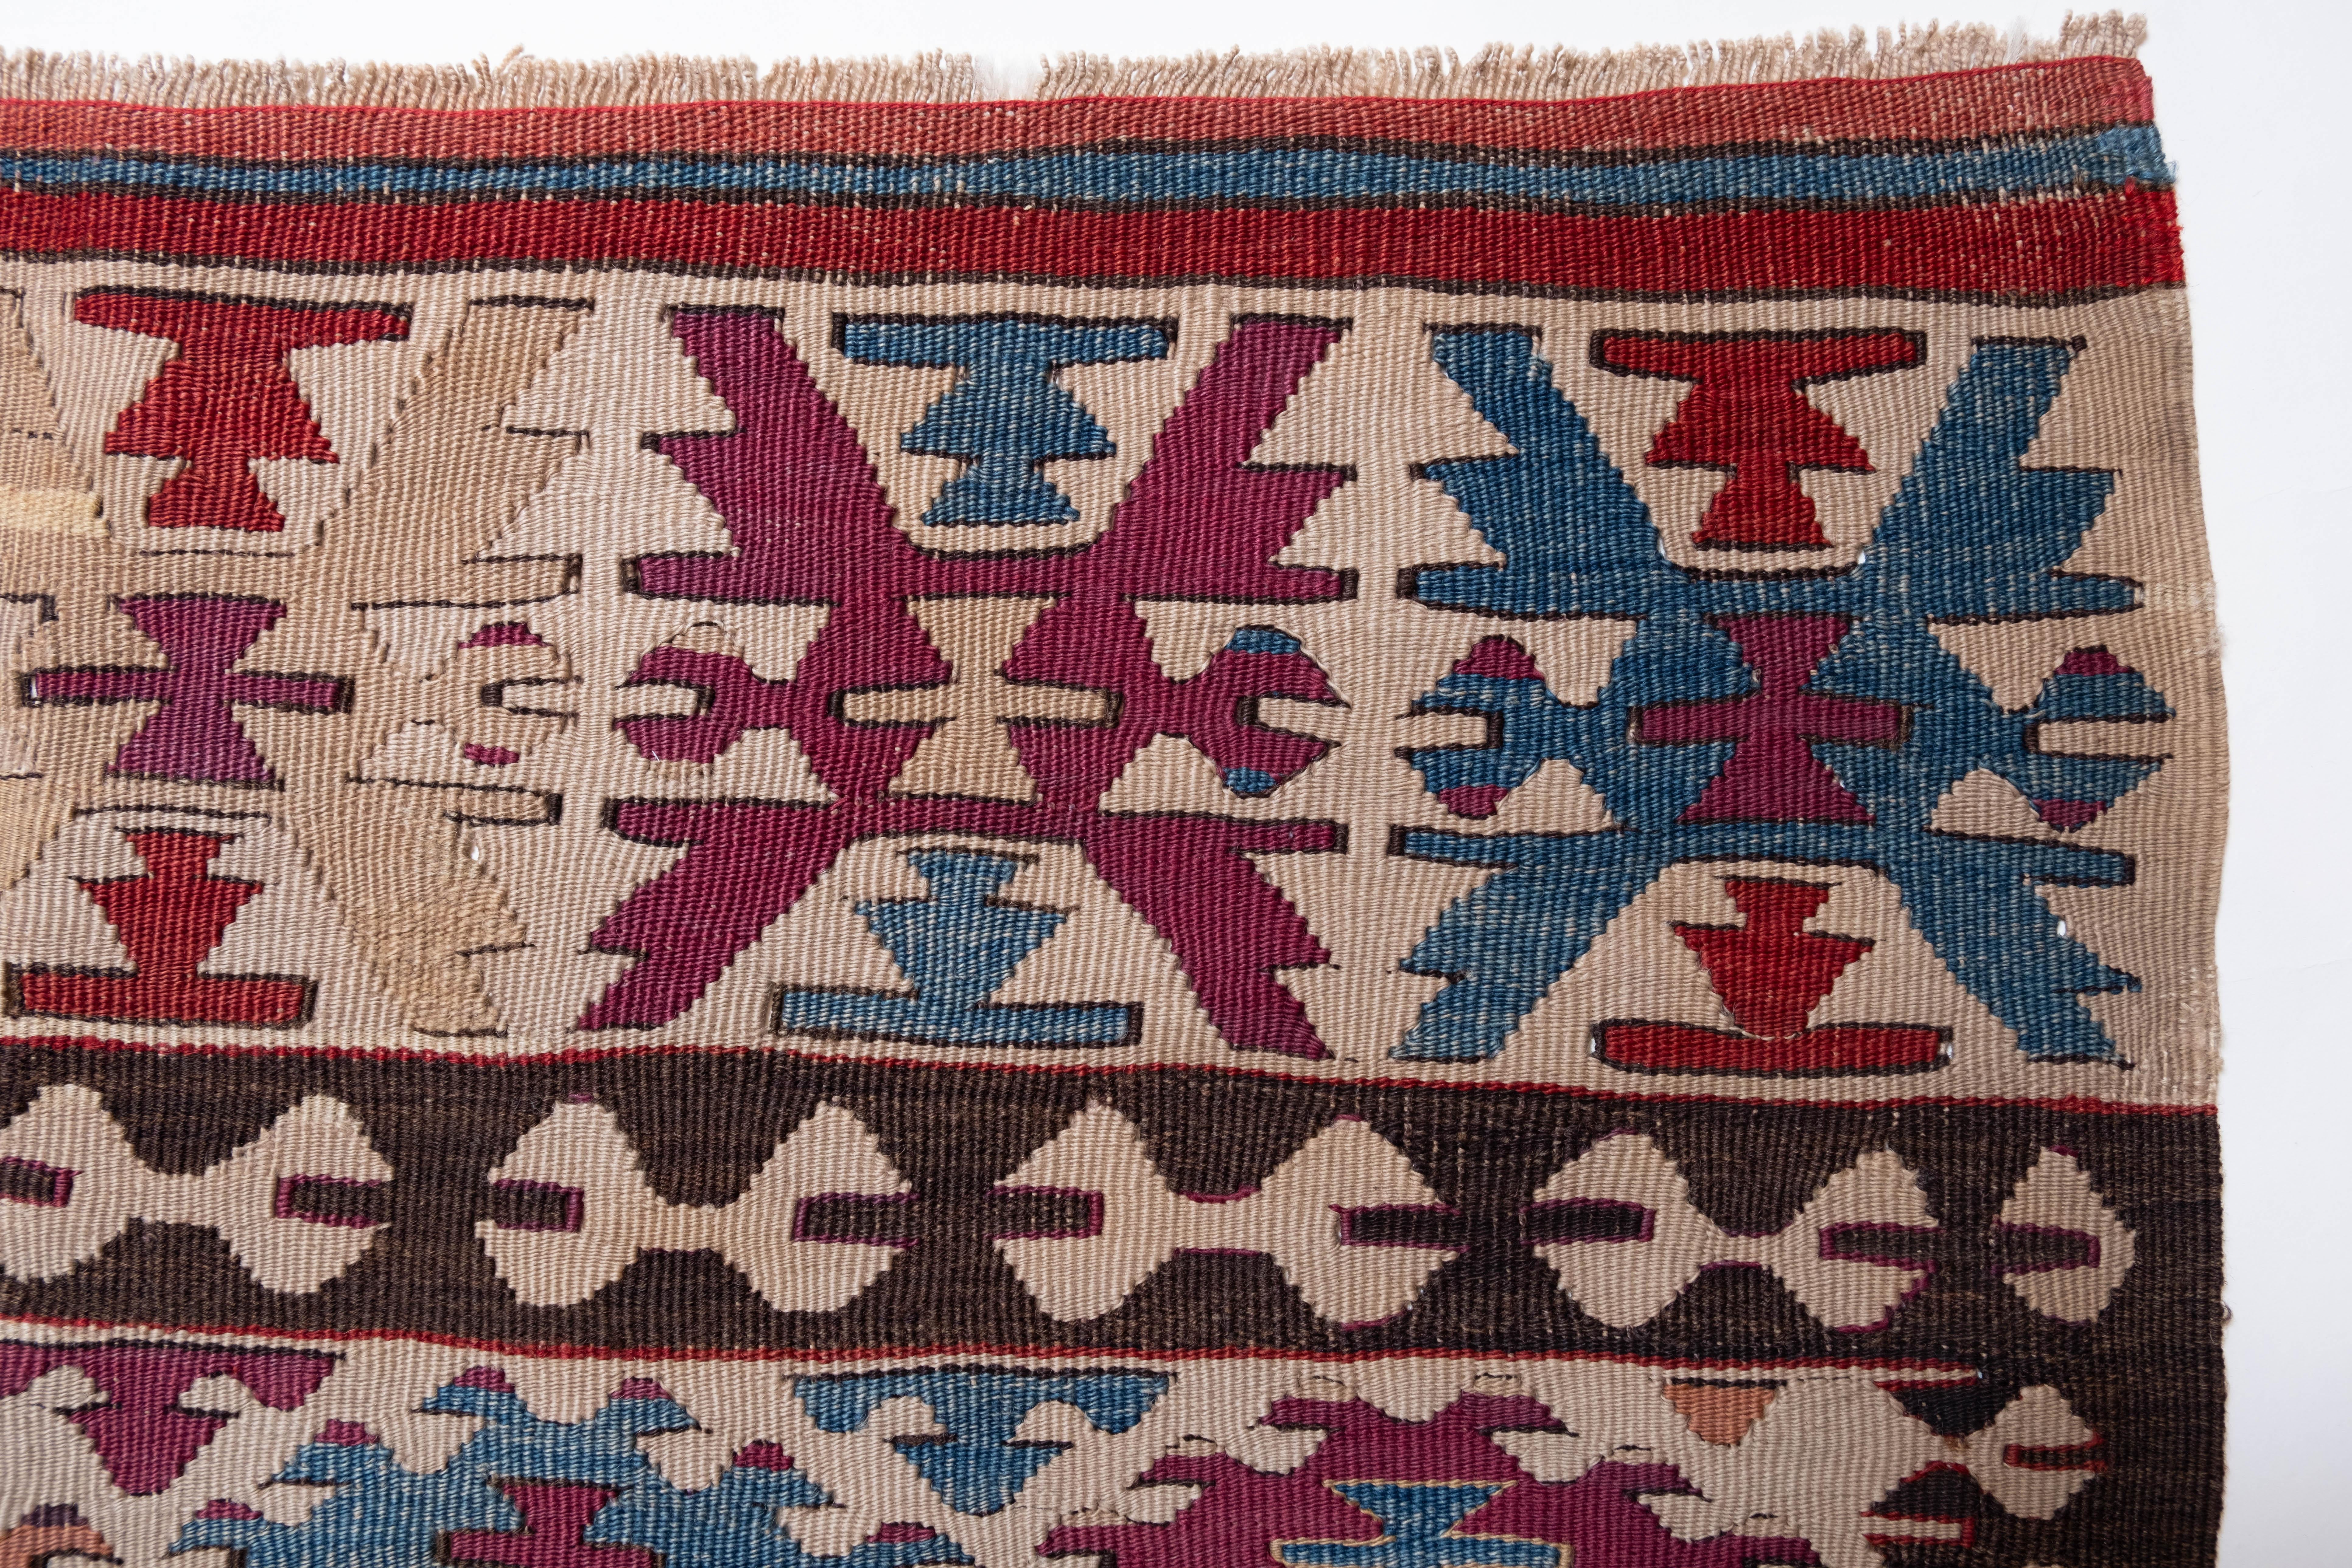 This is Central Anatolian Antique Kilim, from the Isparta region with a rare and beautiful color composition.

This highly collectible antique kilim has wonderful special colors and textures that are typical of an old kilim in good condition. It is